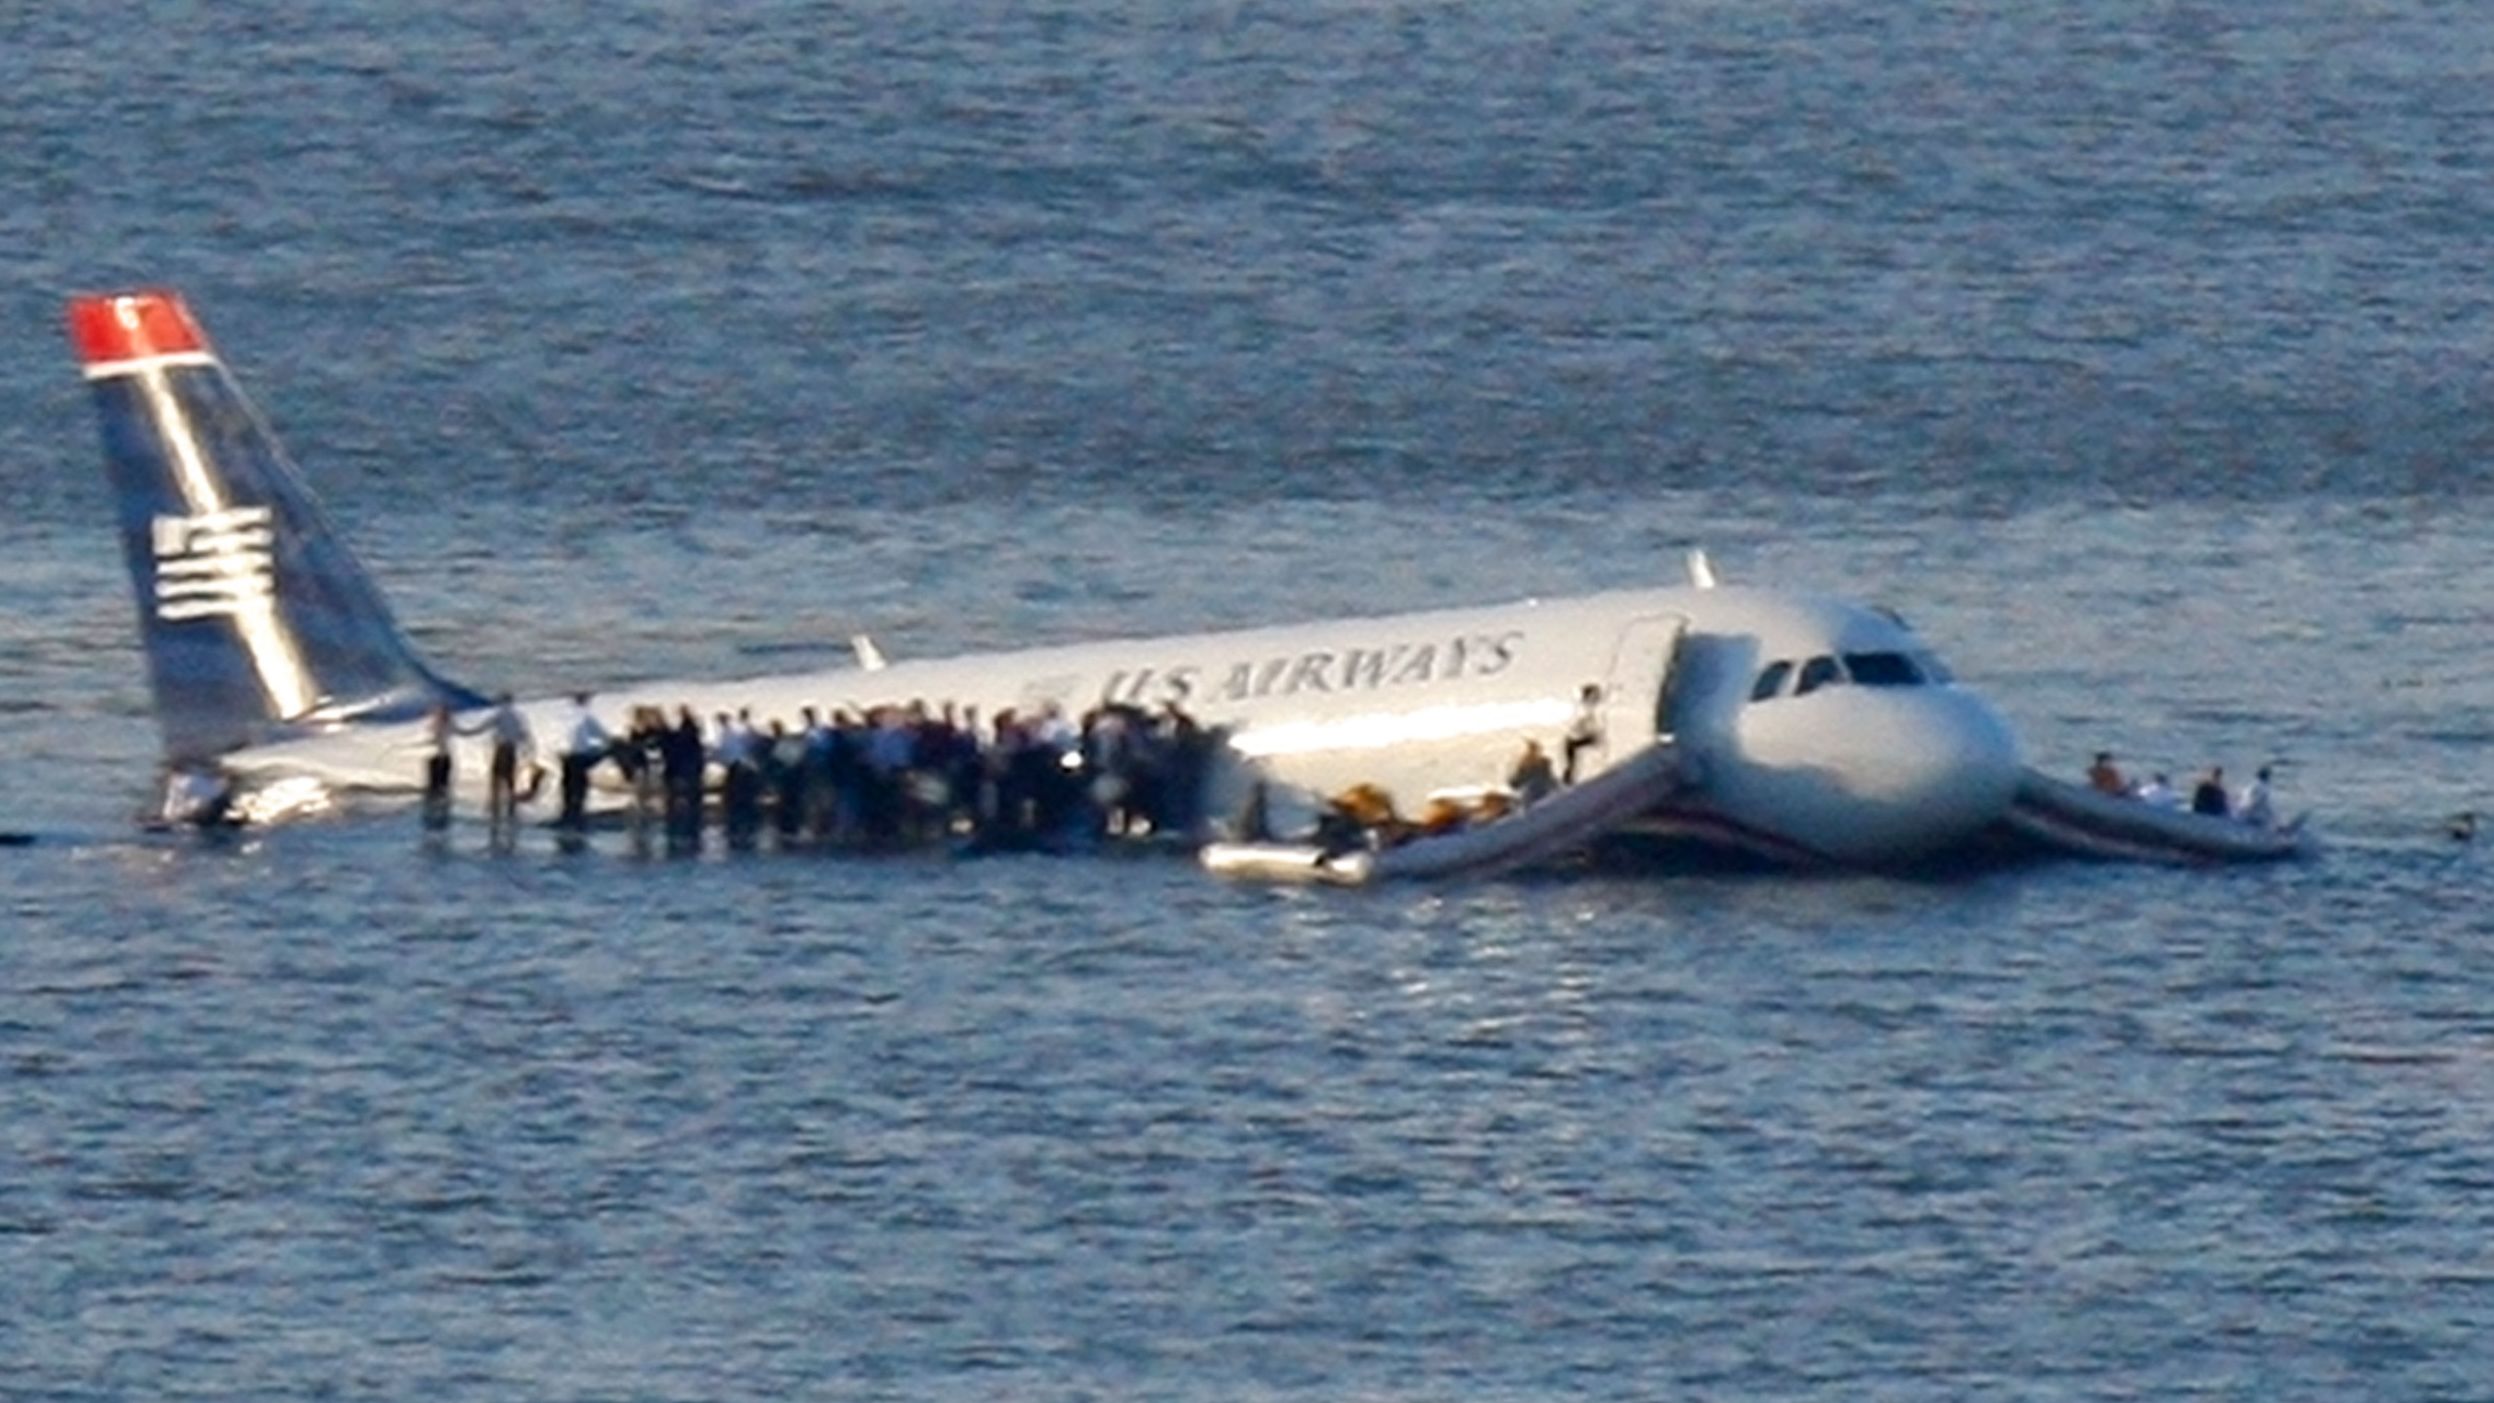 How the Miracle on the Hudson landing changed the lives of the people  onboard